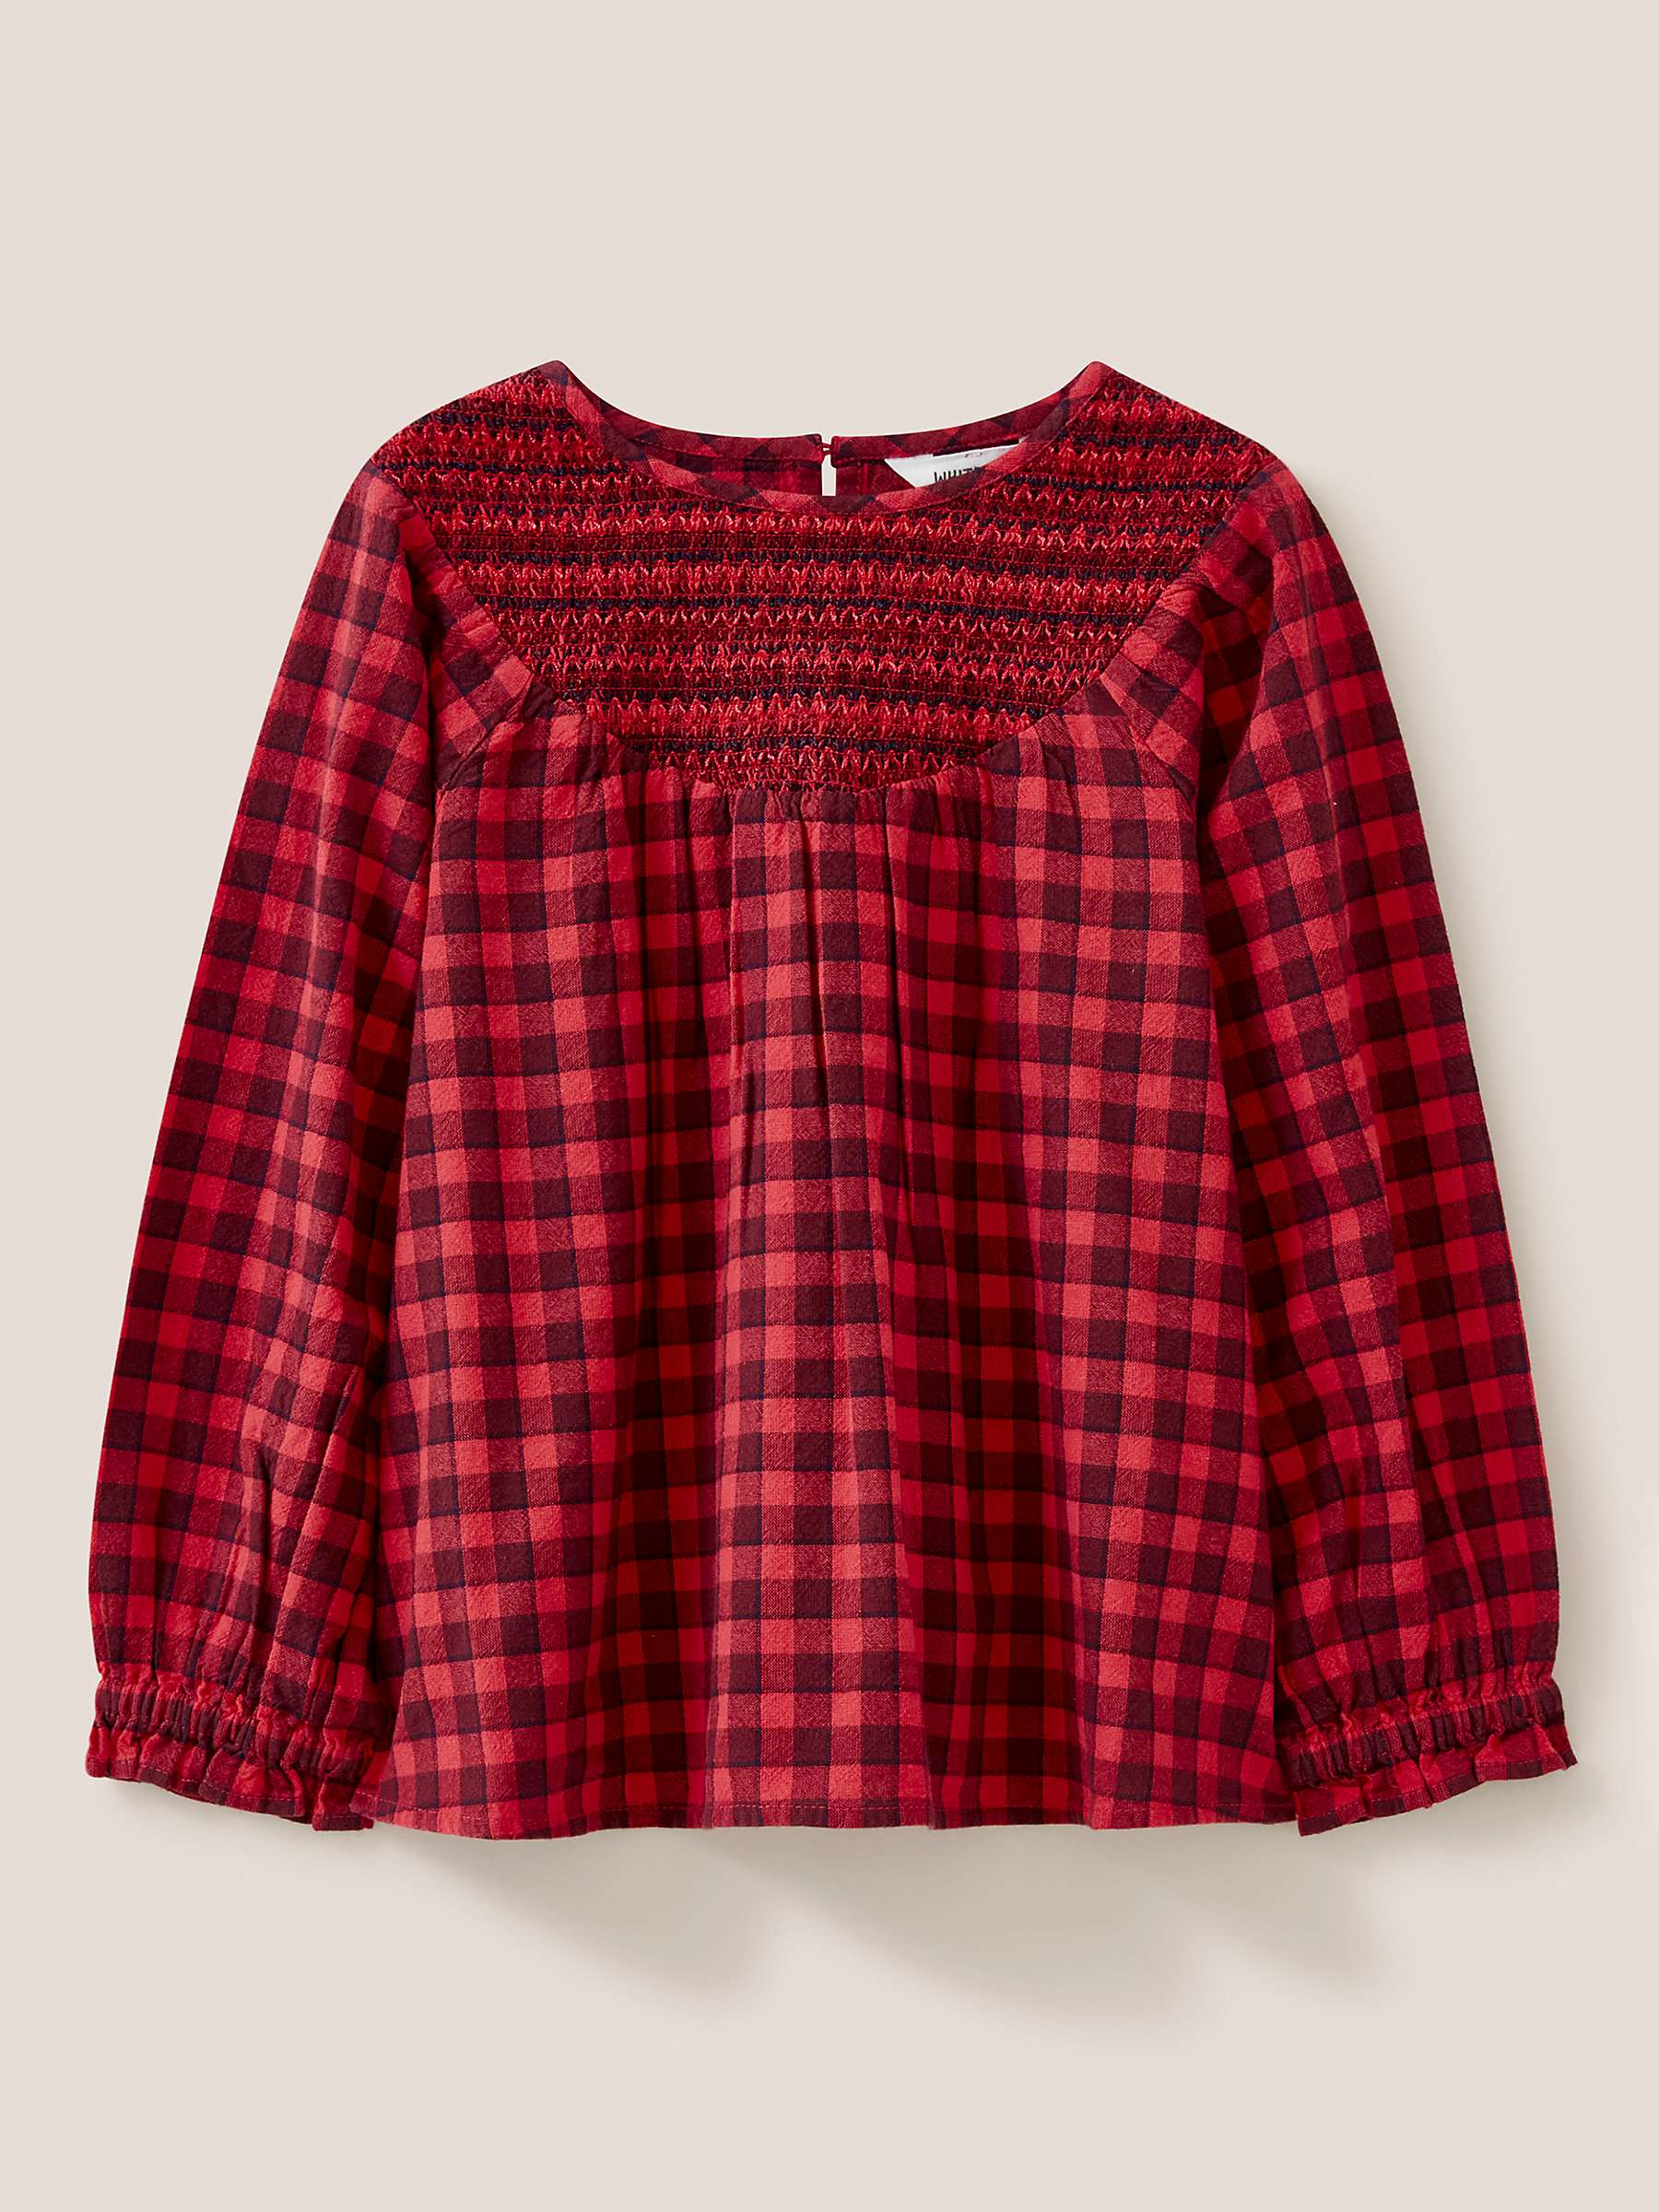 Buy White Stuff Kids' Adeline Check Top, Red/Multi Online at johnlewis.com